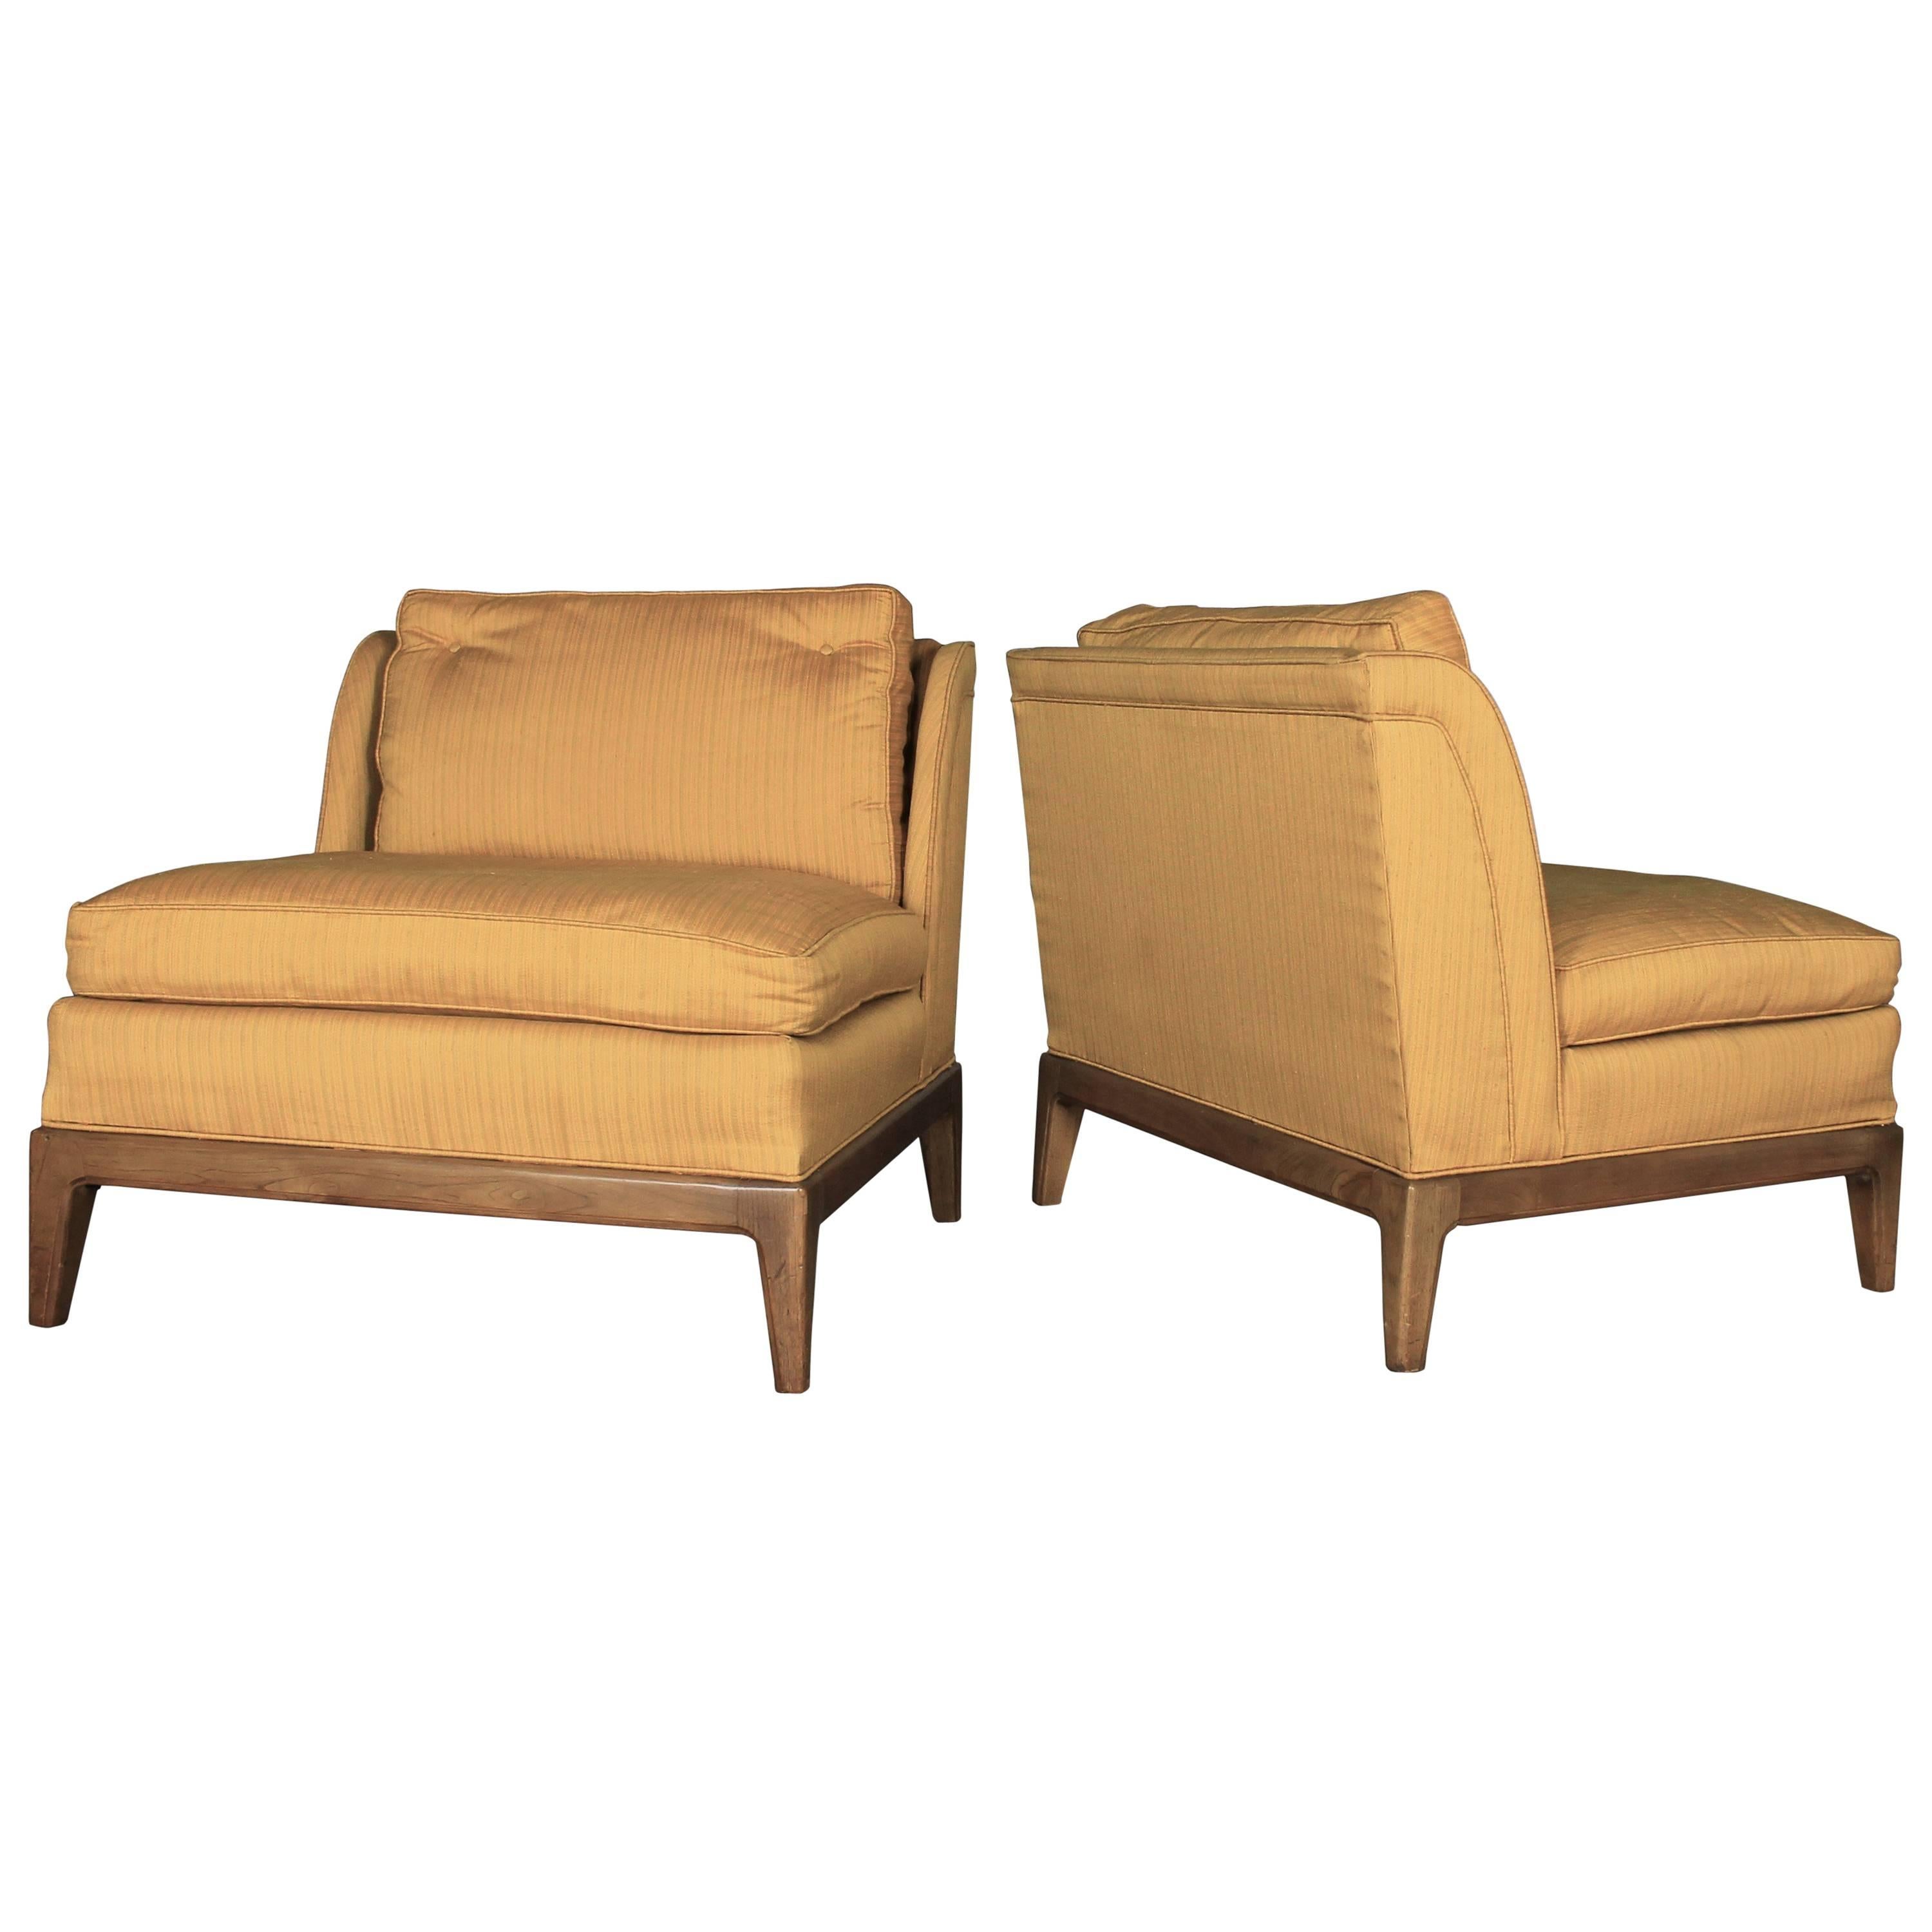 Gold Slipper Chairs, Drexel for Sears Symphony Vintage, Mid-Century Modern, Pair